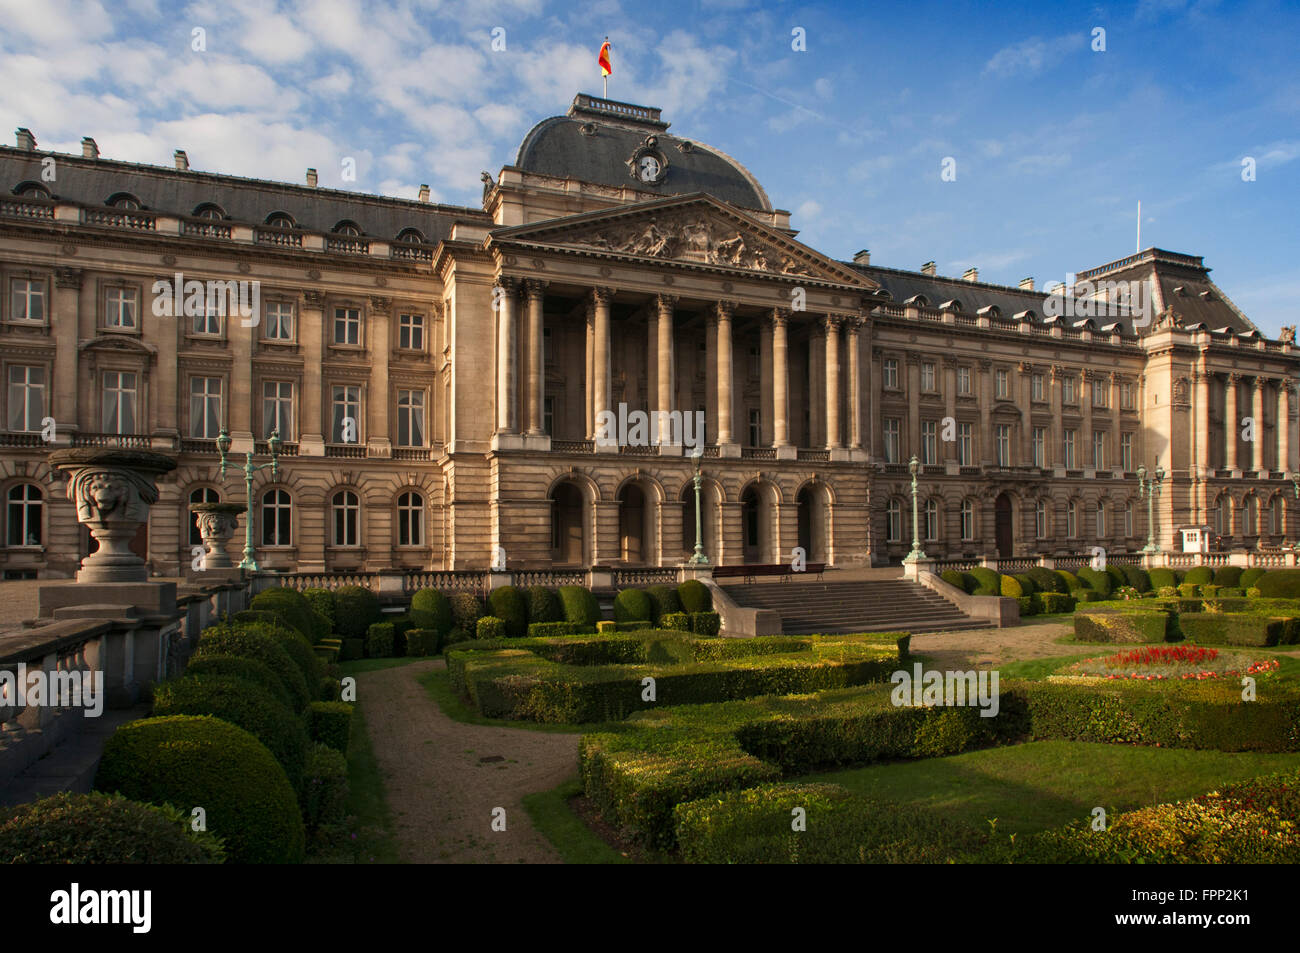 The Royal Palace in the center of Brussels, Belgium. Built in 1904 for King Leopold II Palais Royal. Place des Palais. (From mid Stock Photo